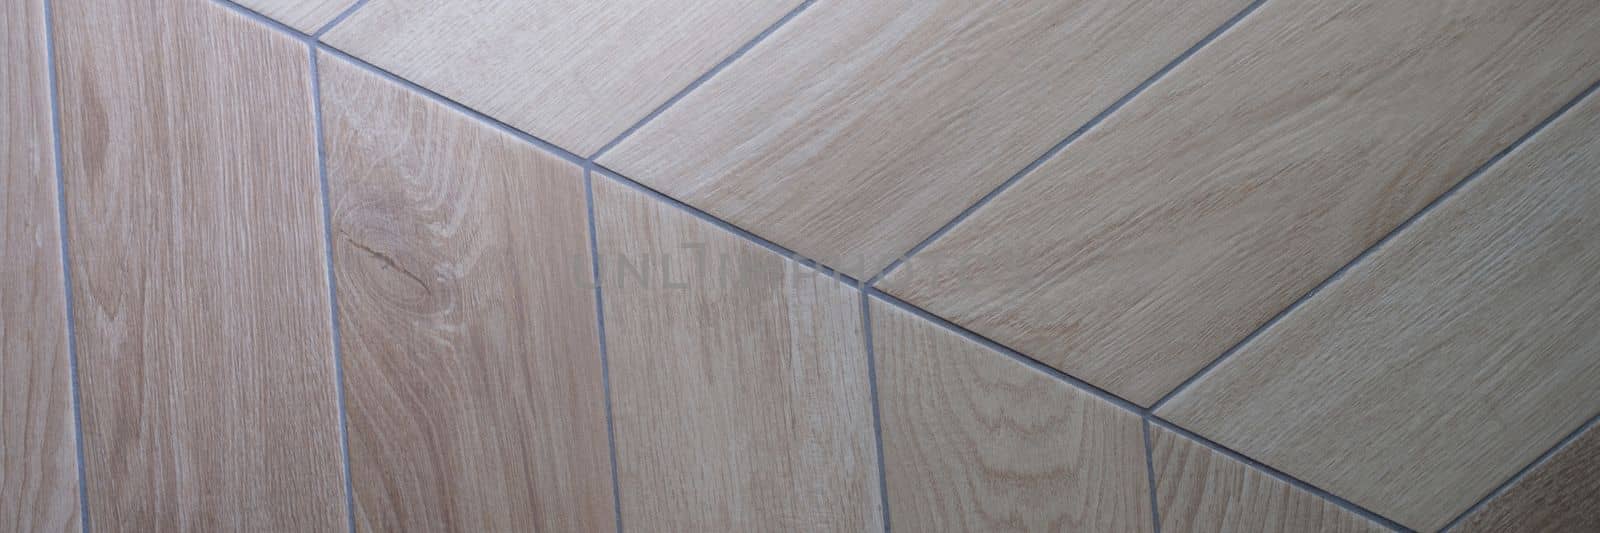 Oak texture of floor with tiles imitating parquet by kuprevich